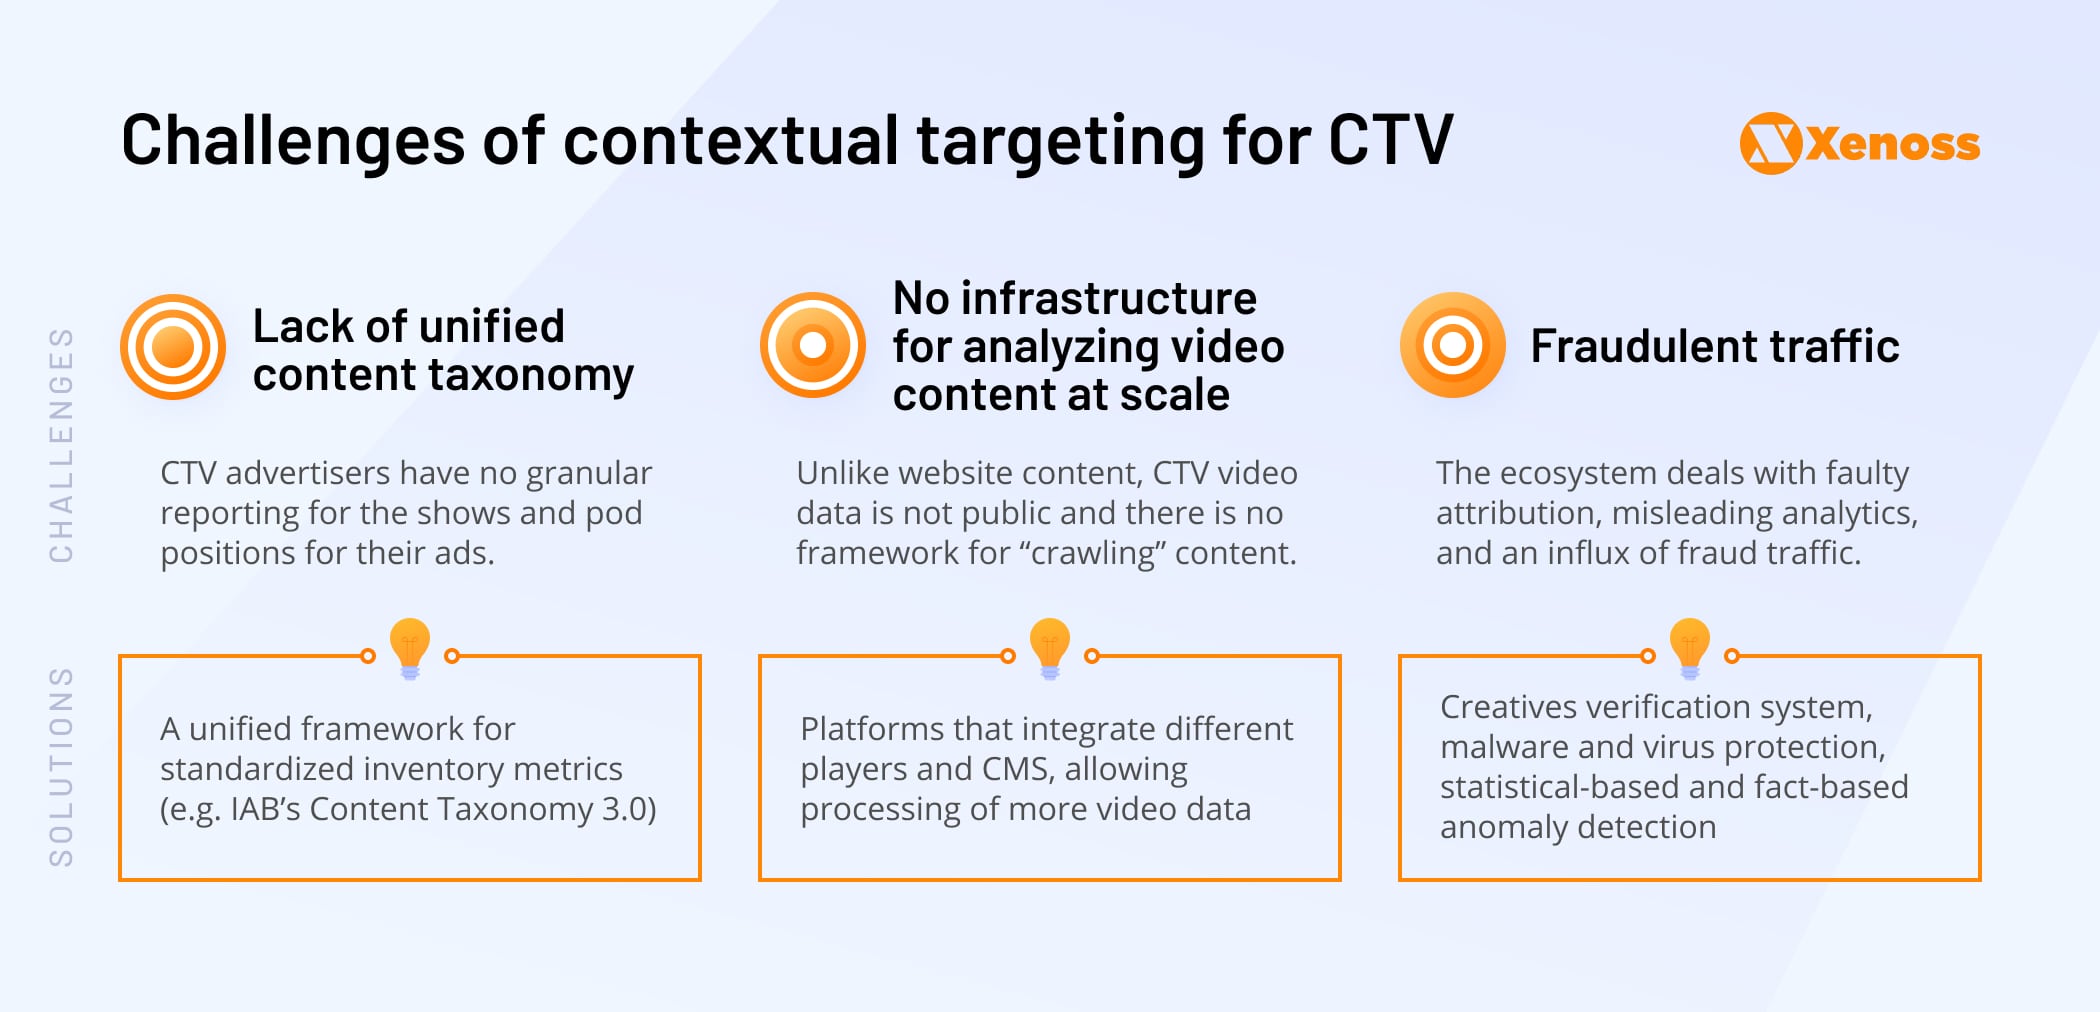 Challenges of contextual targeting for CTV